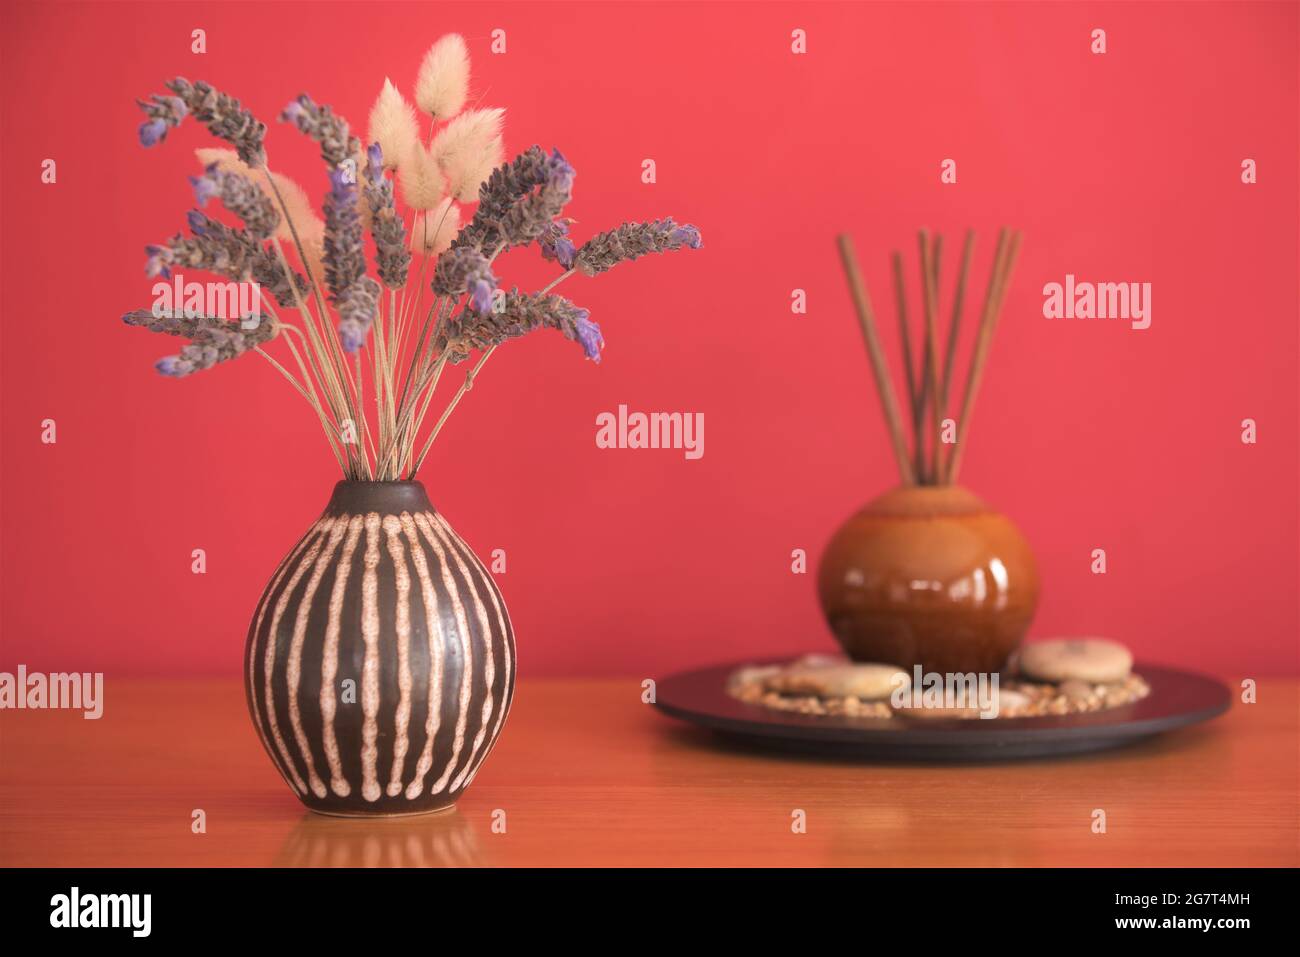 A vase of lavender and aroma diffusion sticks on a wooden table with a red background Stock Photo